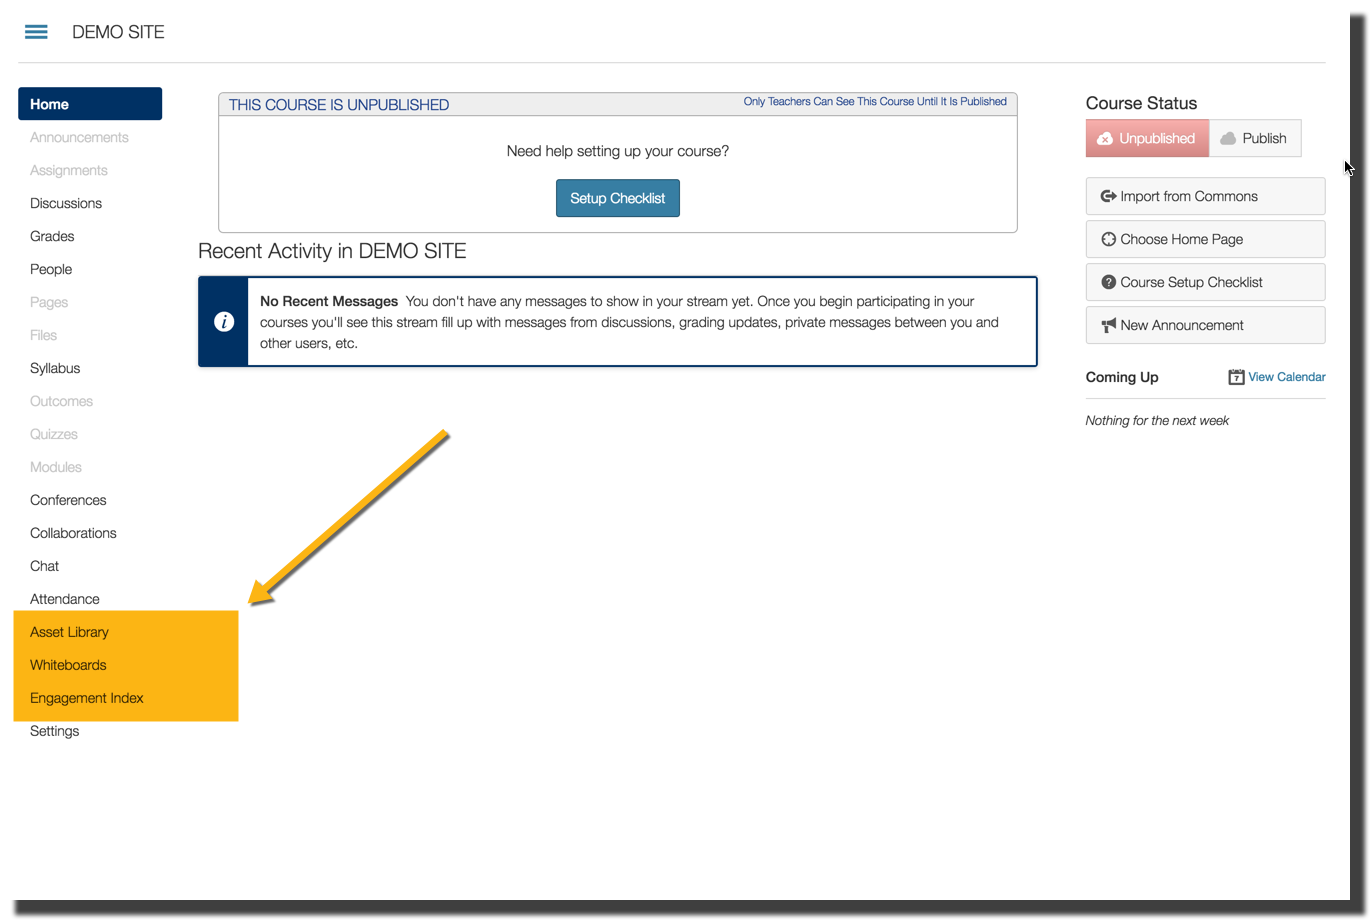 Screenshot of a course site home page with all SuiteC tool links on Course Navigation menu